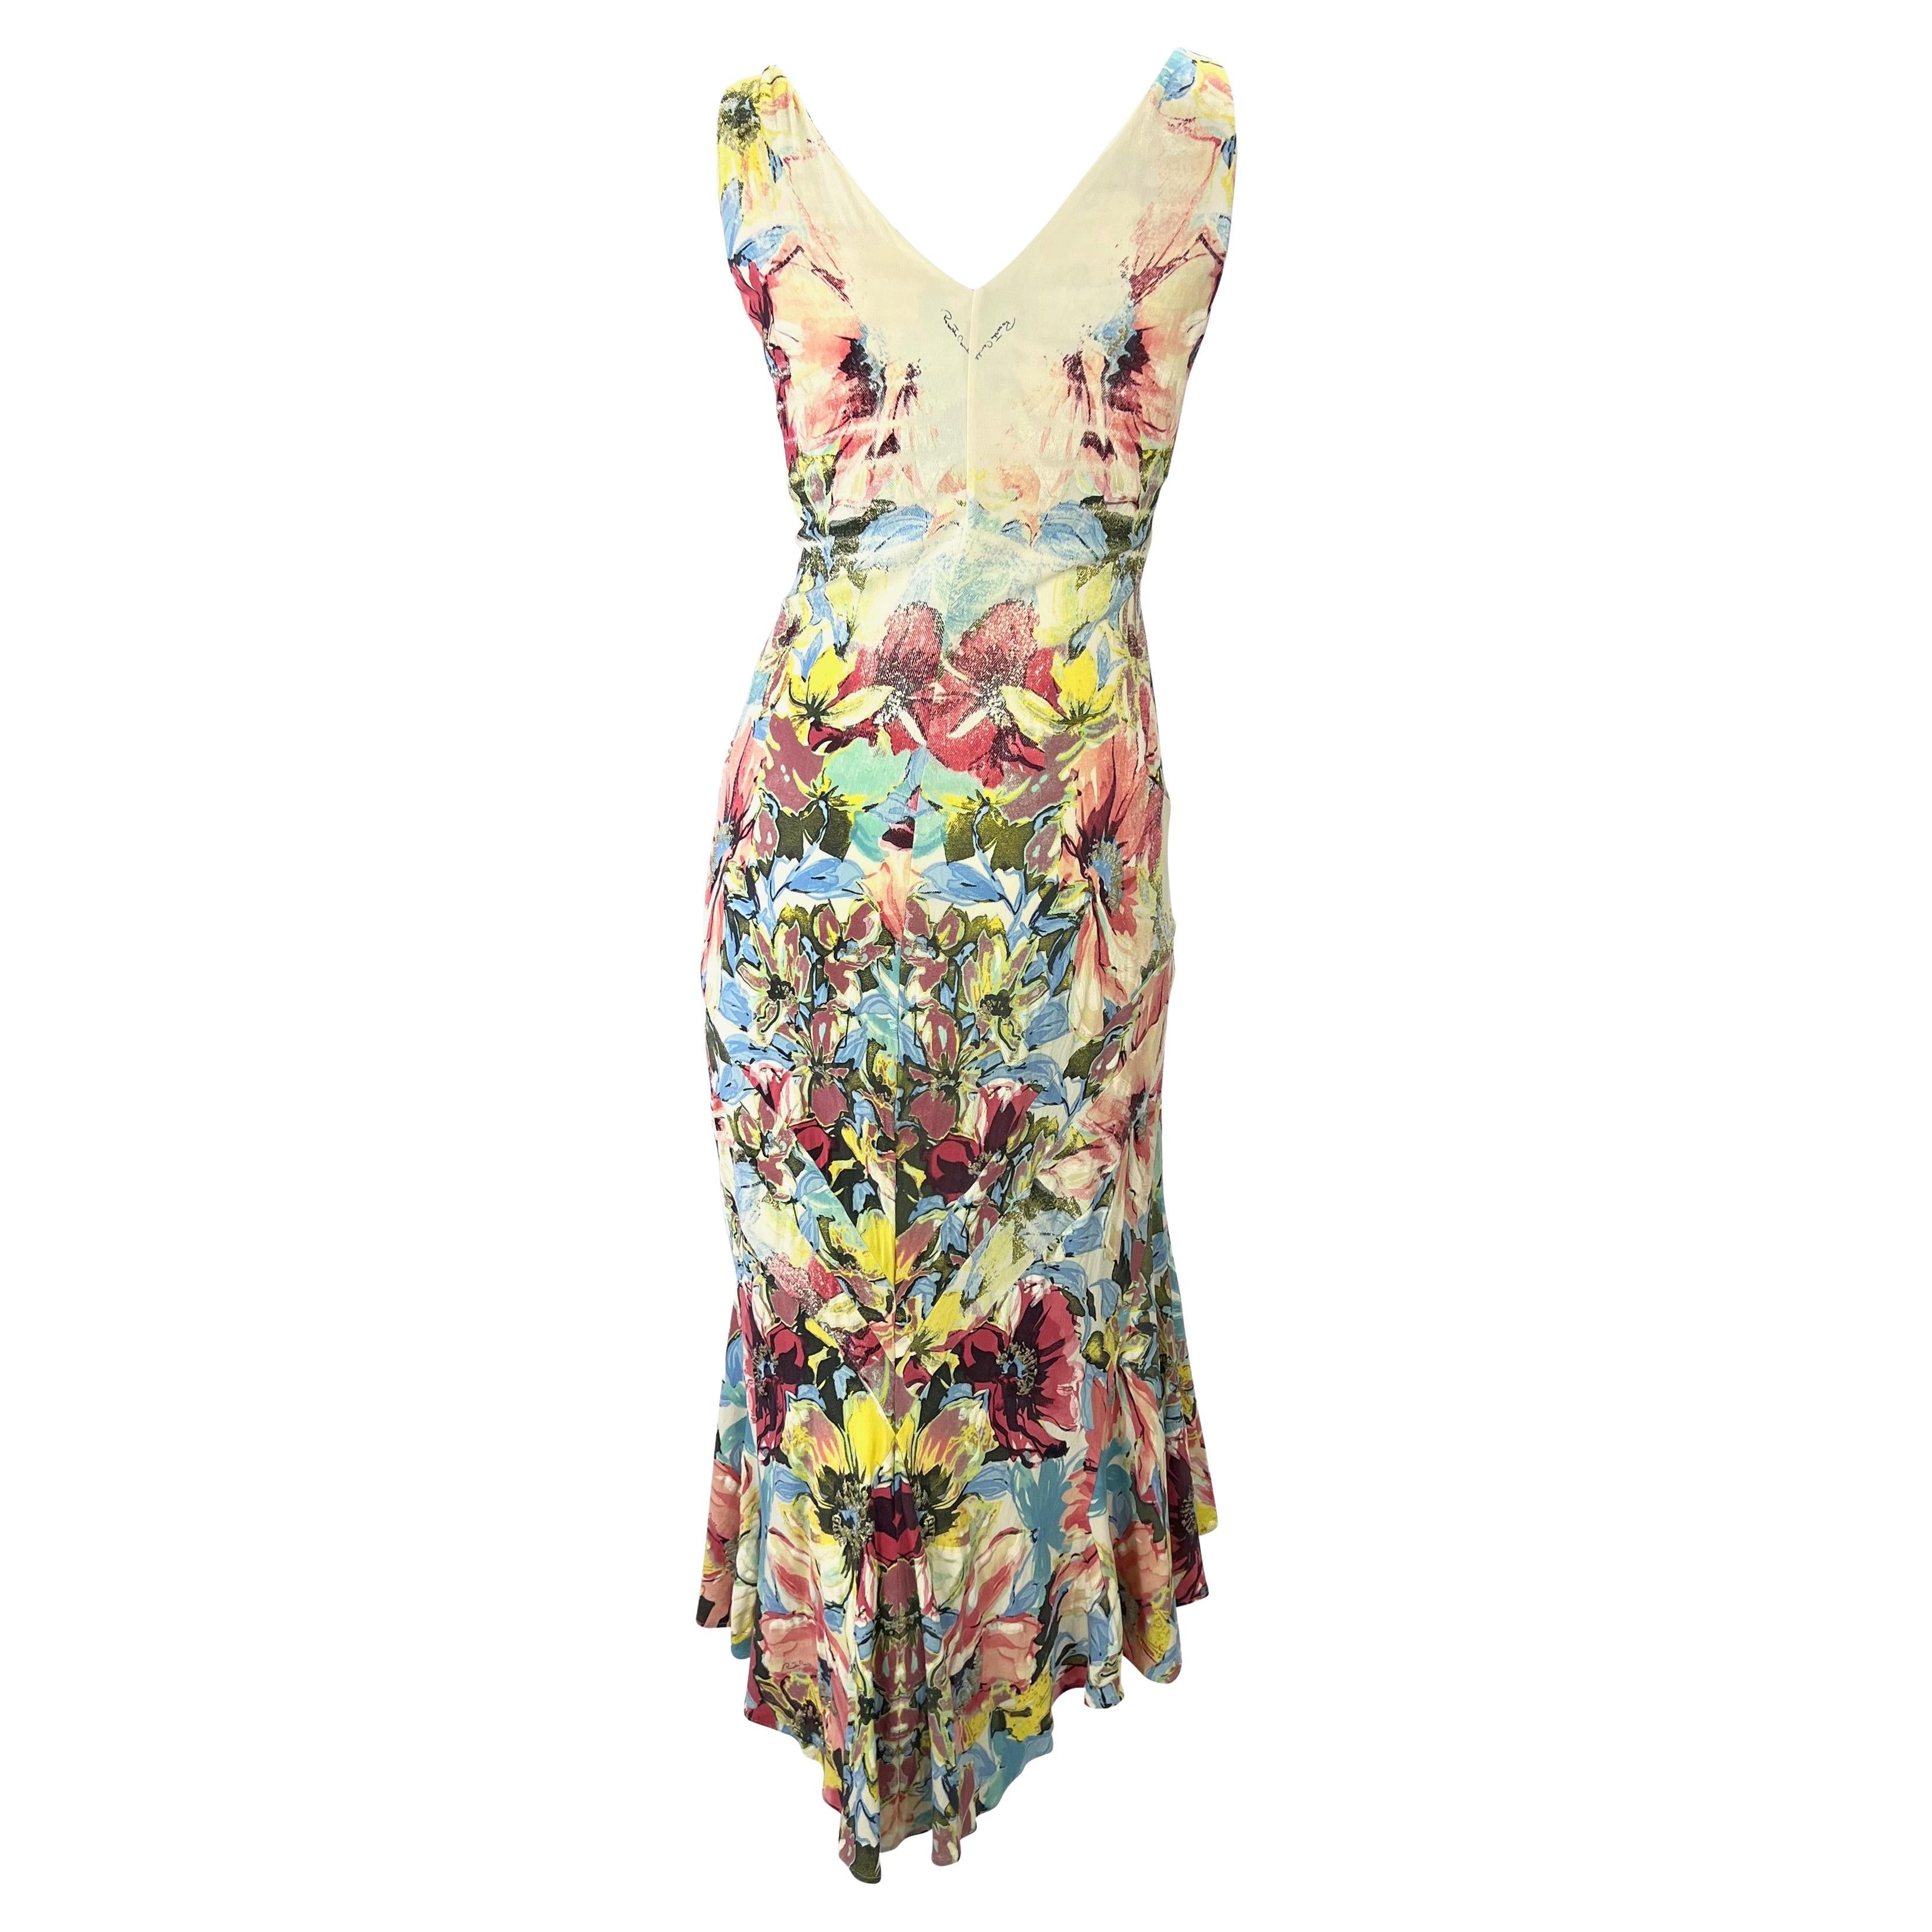 S/S 2003 Roberto Cavalli Floral Abstract Watercolor Silk Stretch Flare Dress In Good Condition For Sale In West Hollywood, CA